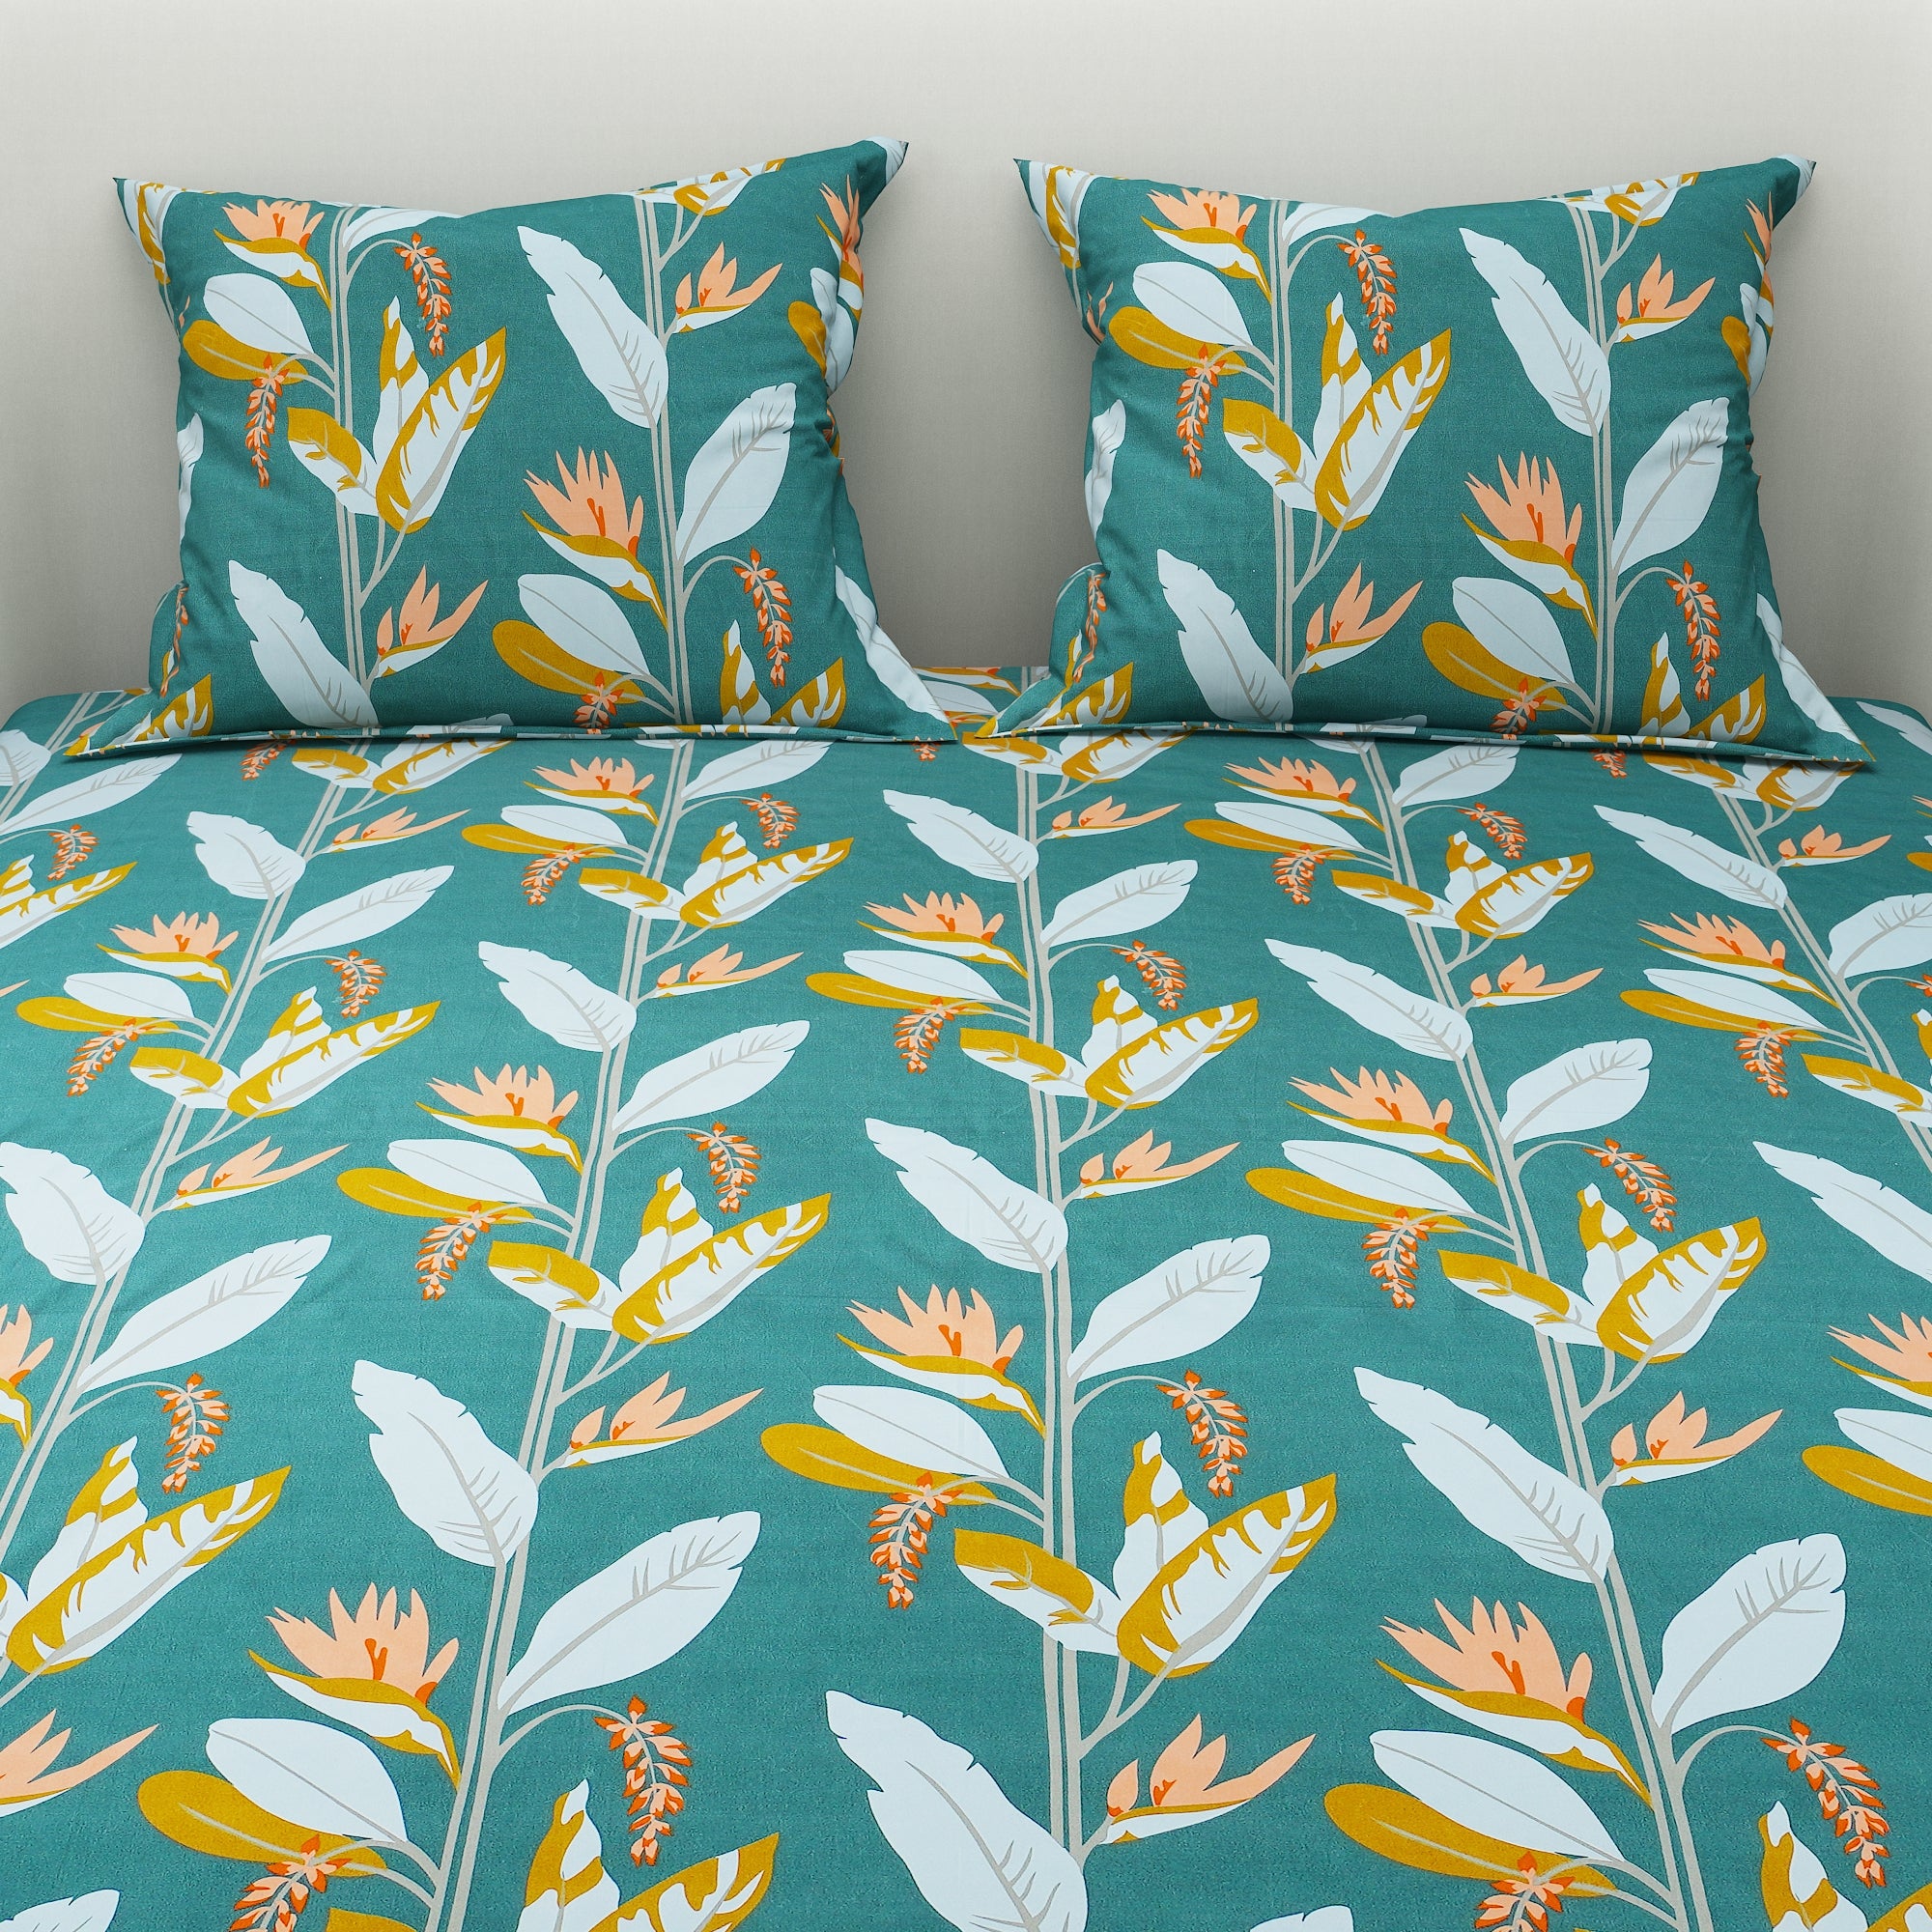 Colourful Printed Bedsheet Flower And Leaf Design With Pillow Covers